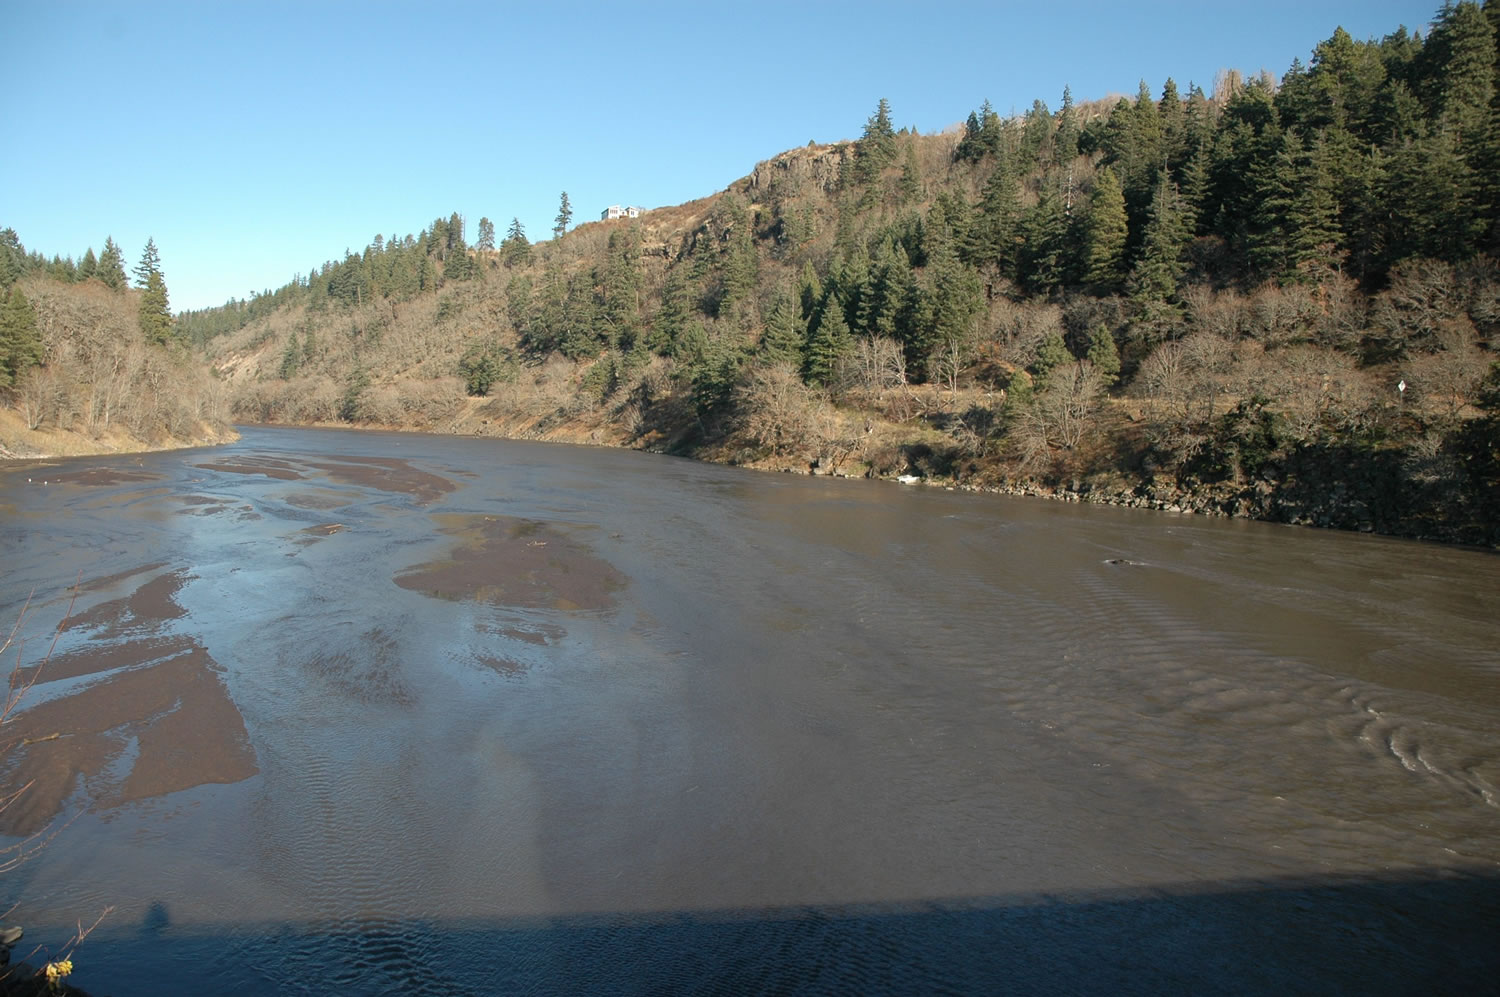 The White Salmon River at its confluence with the Columbia has filled with silt and is only inches deep since the breaching of Condit Dam.